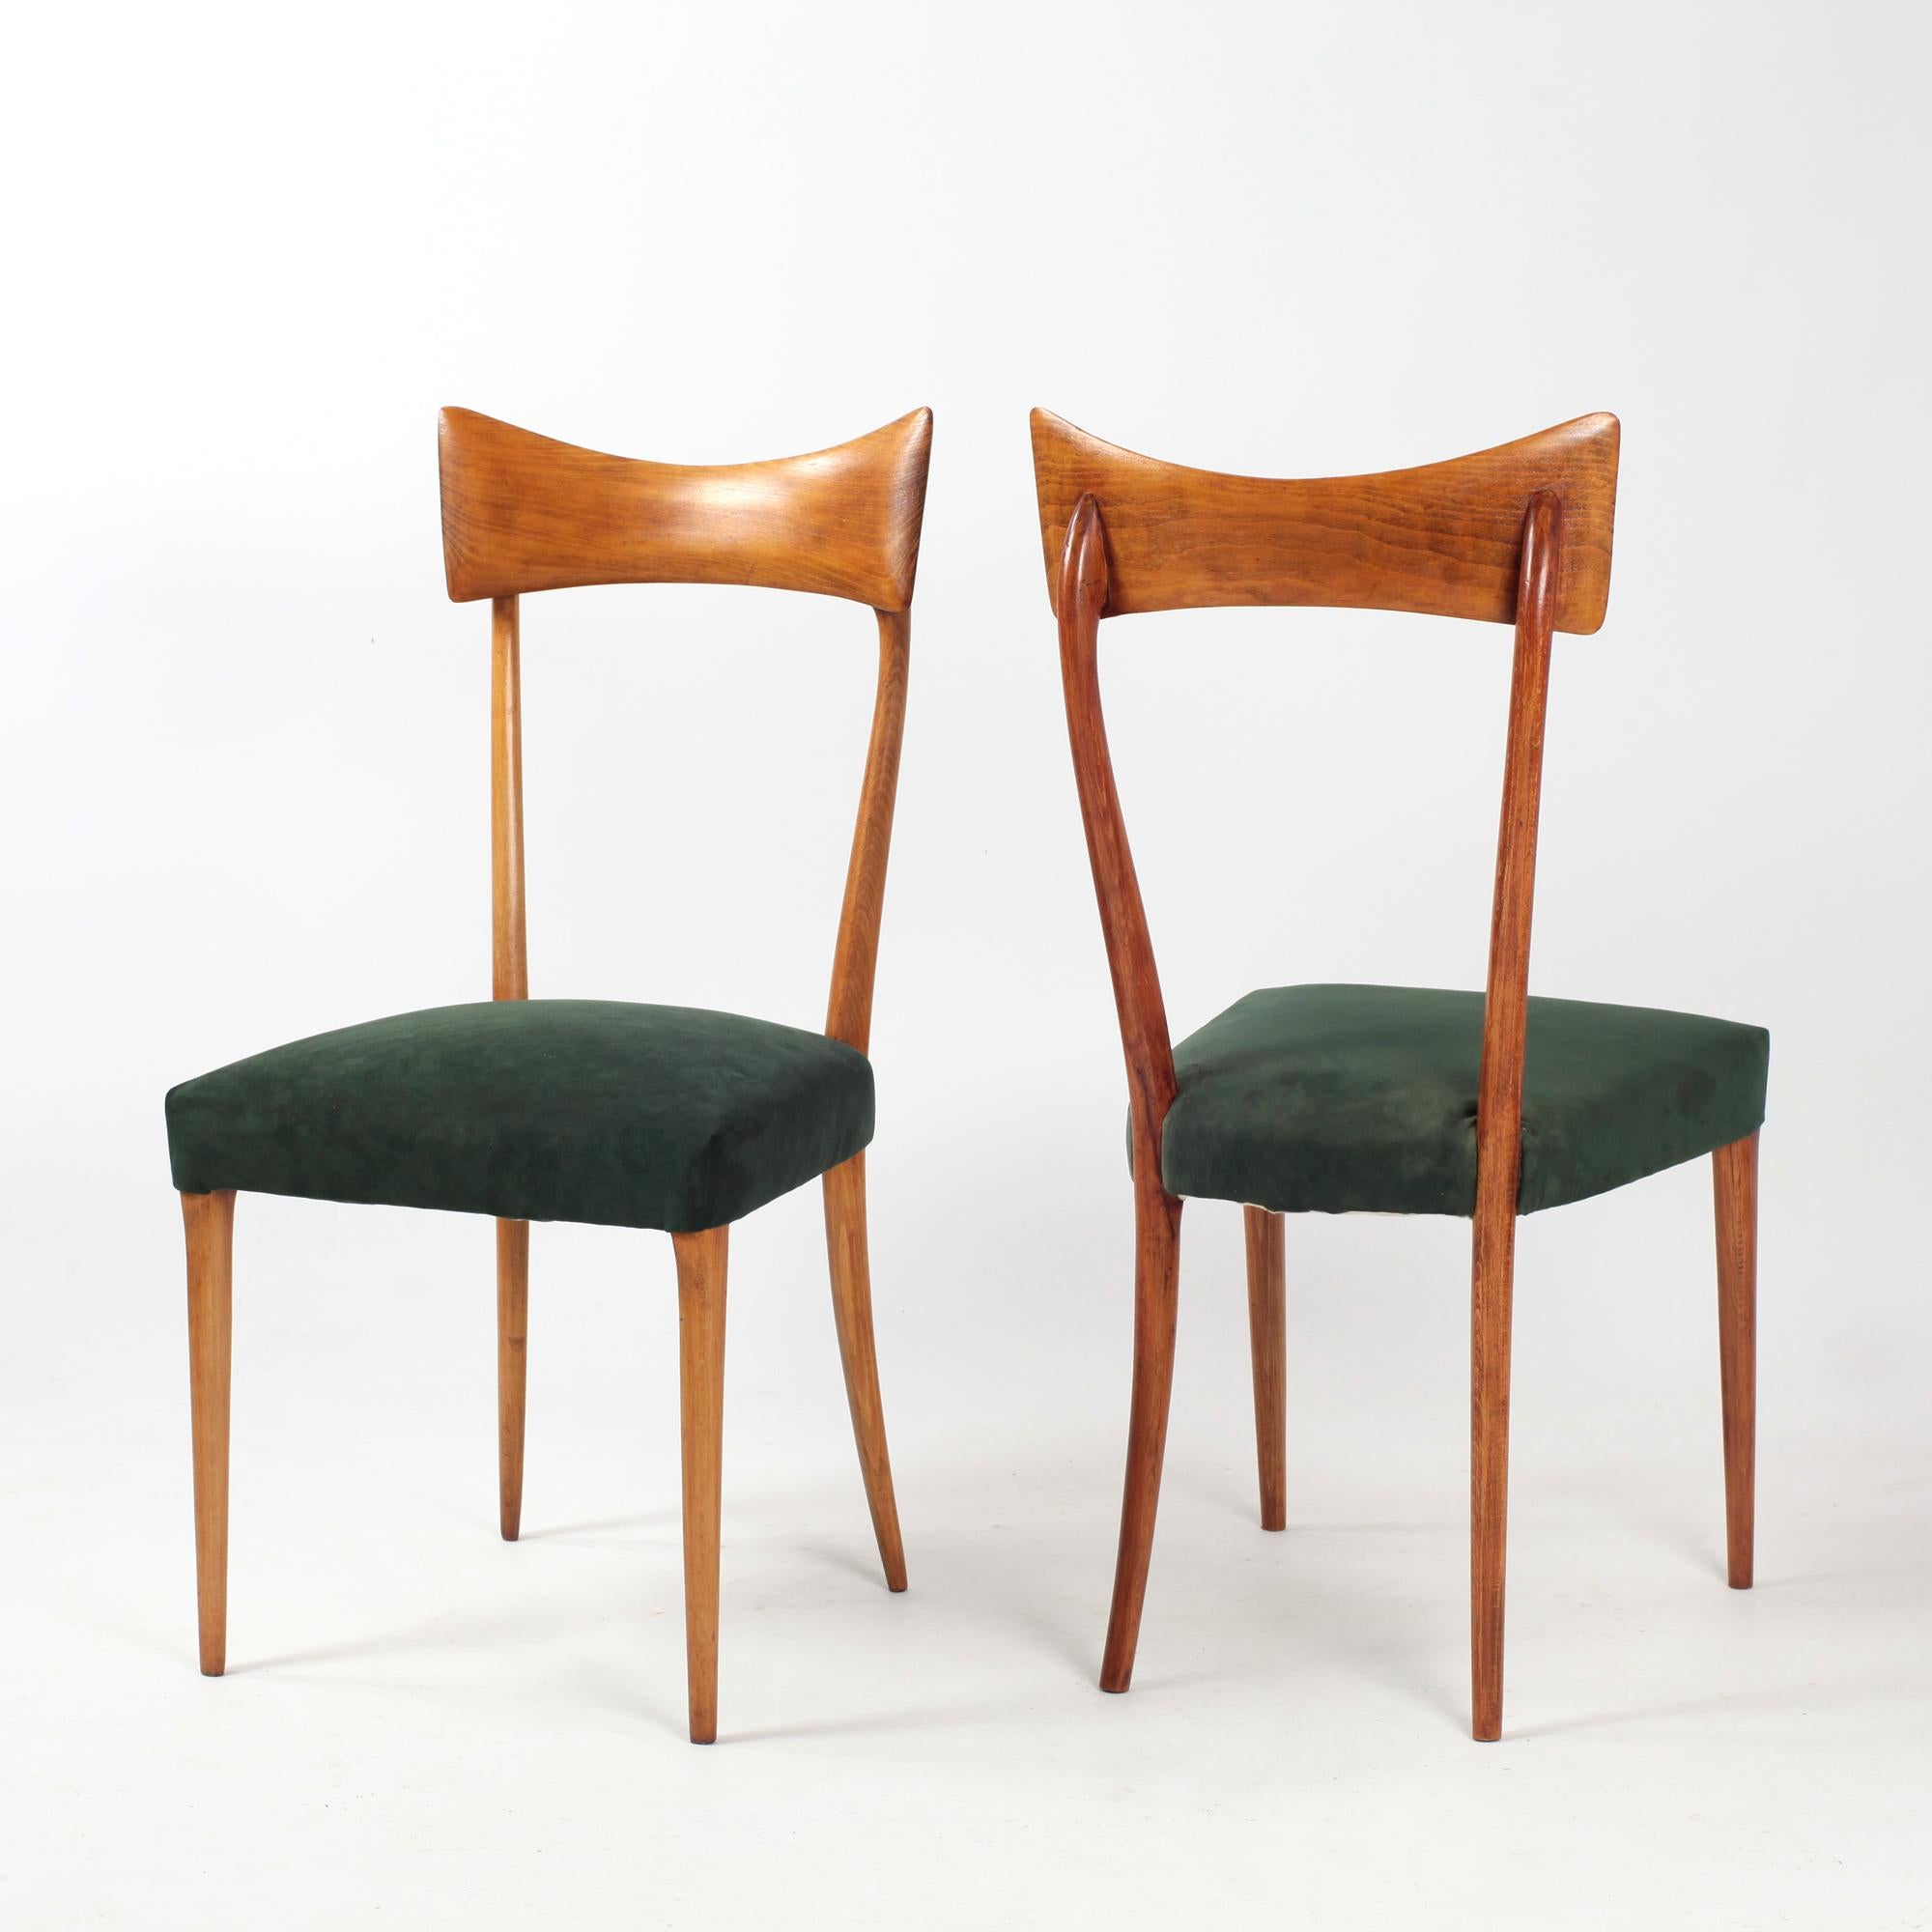 Set of six dining chairs attributed to Ico Parisi for Ariberto Colombo, Cantu, Italy, 1955
Elegant, round and light shape, nice model of Italian design.

These chairs are made of beechwood and fabric. They have been upholstered with a dark green